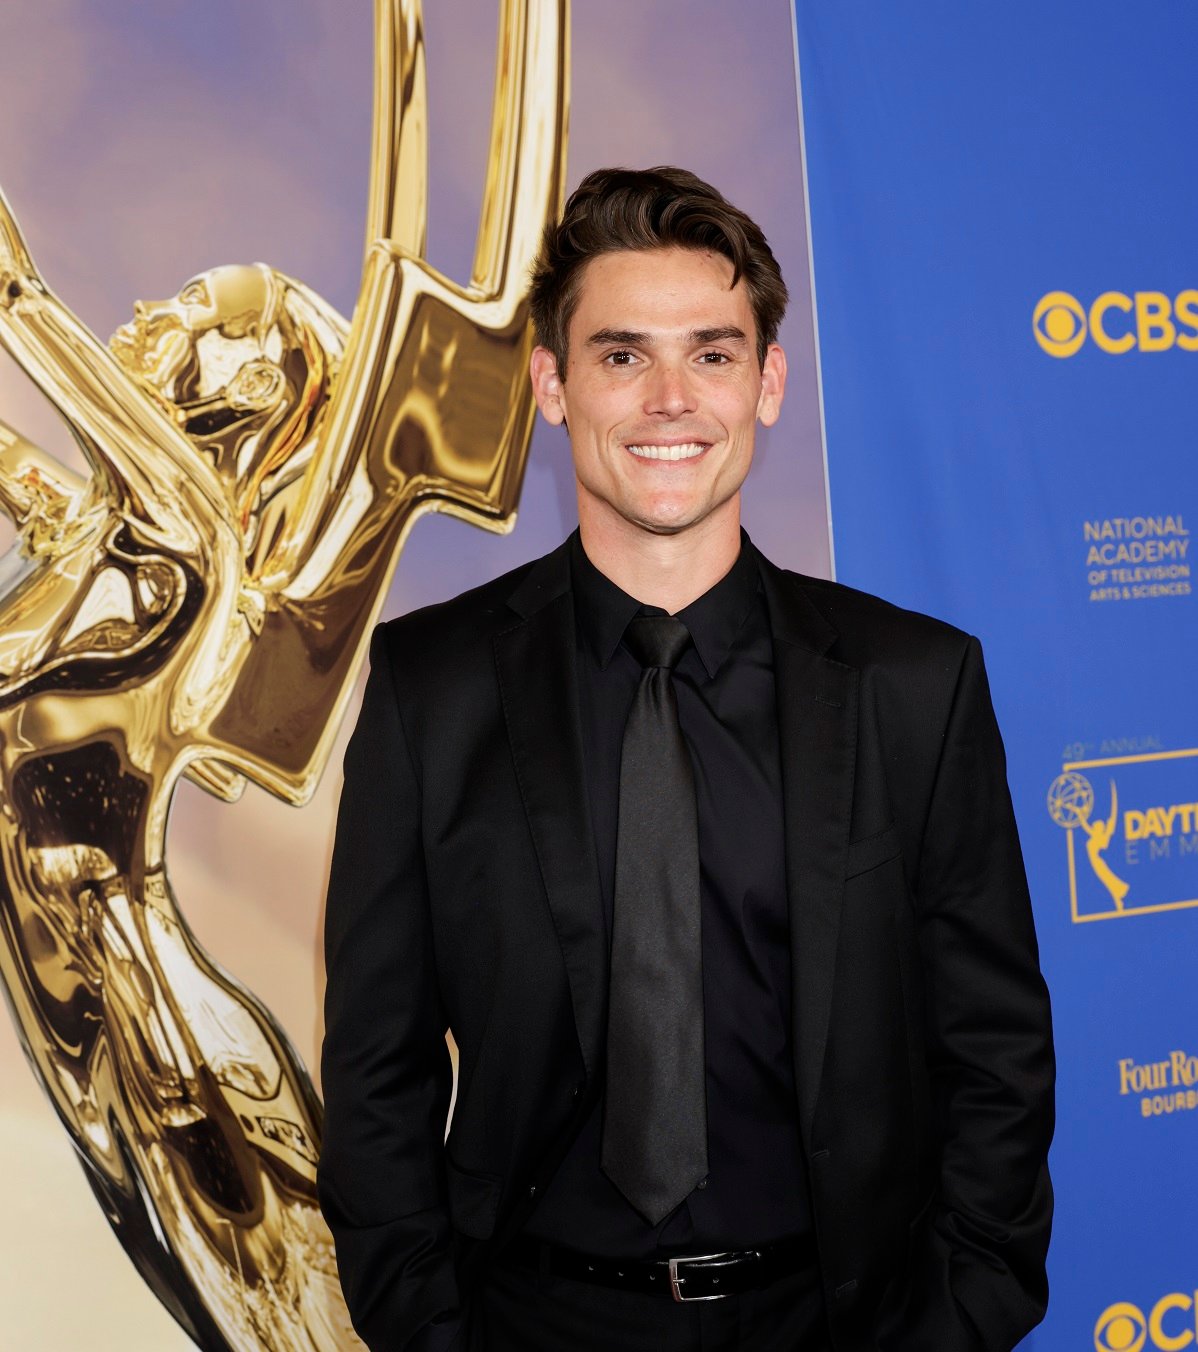 'The Young and the Restless' star Mark Grossman in a black suit and posing in front of an Emmy picture.